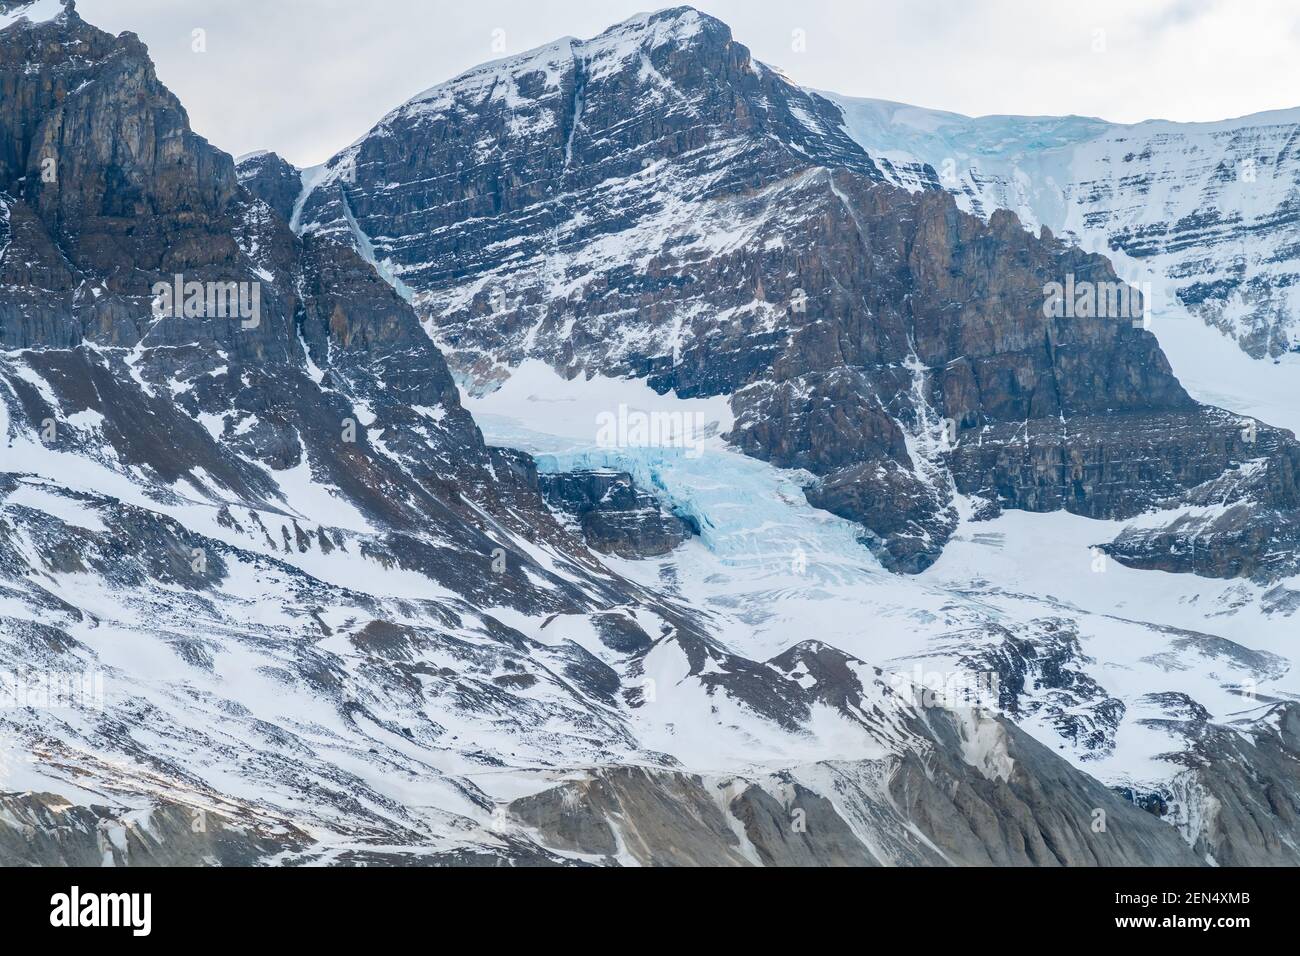 Winter view of the Athabasca Glacier located in the Canadian Rockies Stock Photo